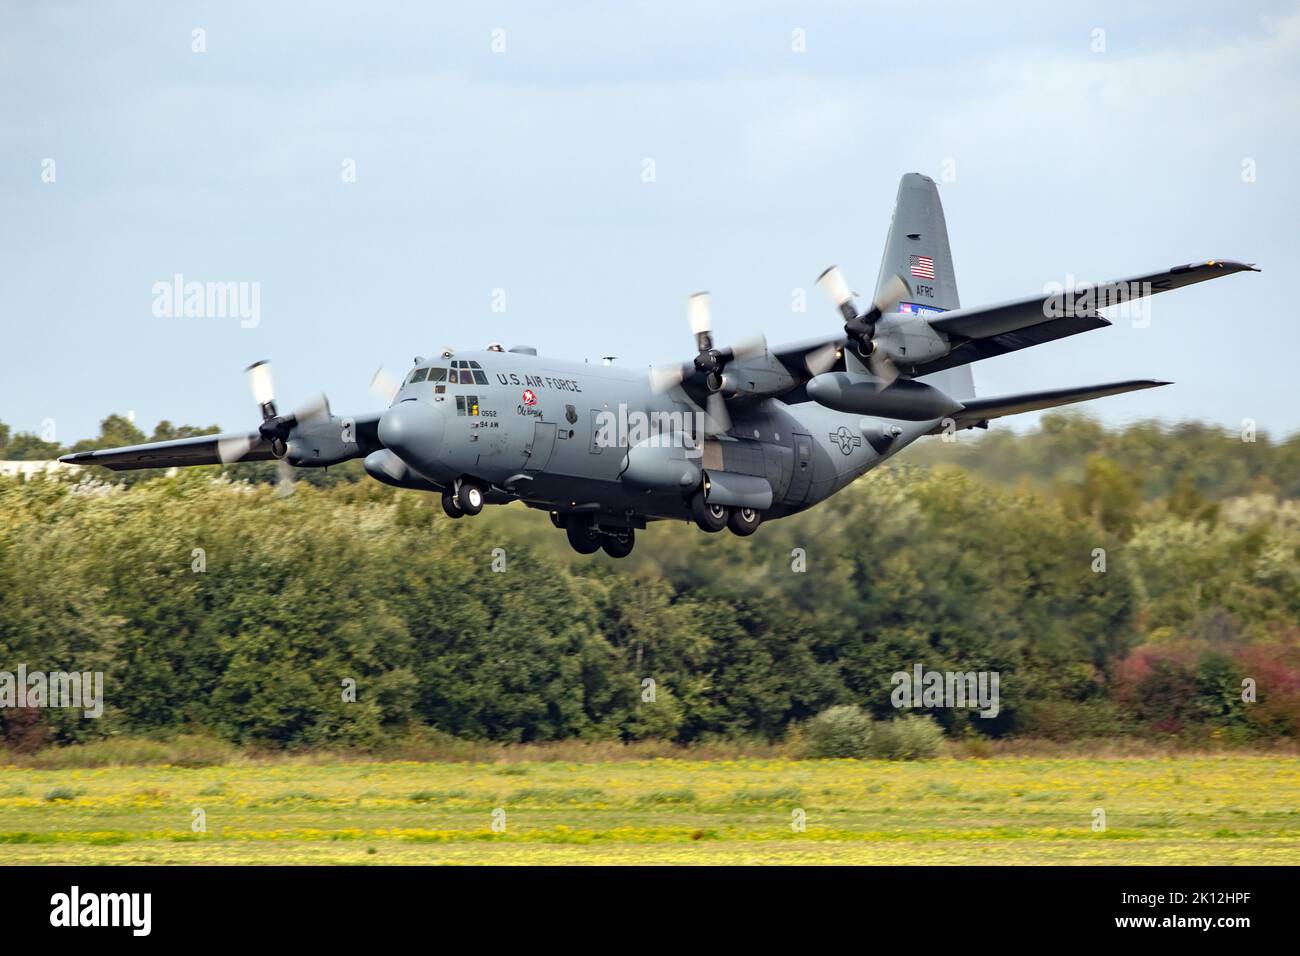 US Air Force Lockheed C-130H Hercules transport plane from 94th Airlift Wing landing on Eindhoven airbase. The Netherlands - September 22, 2018 Stock Photo